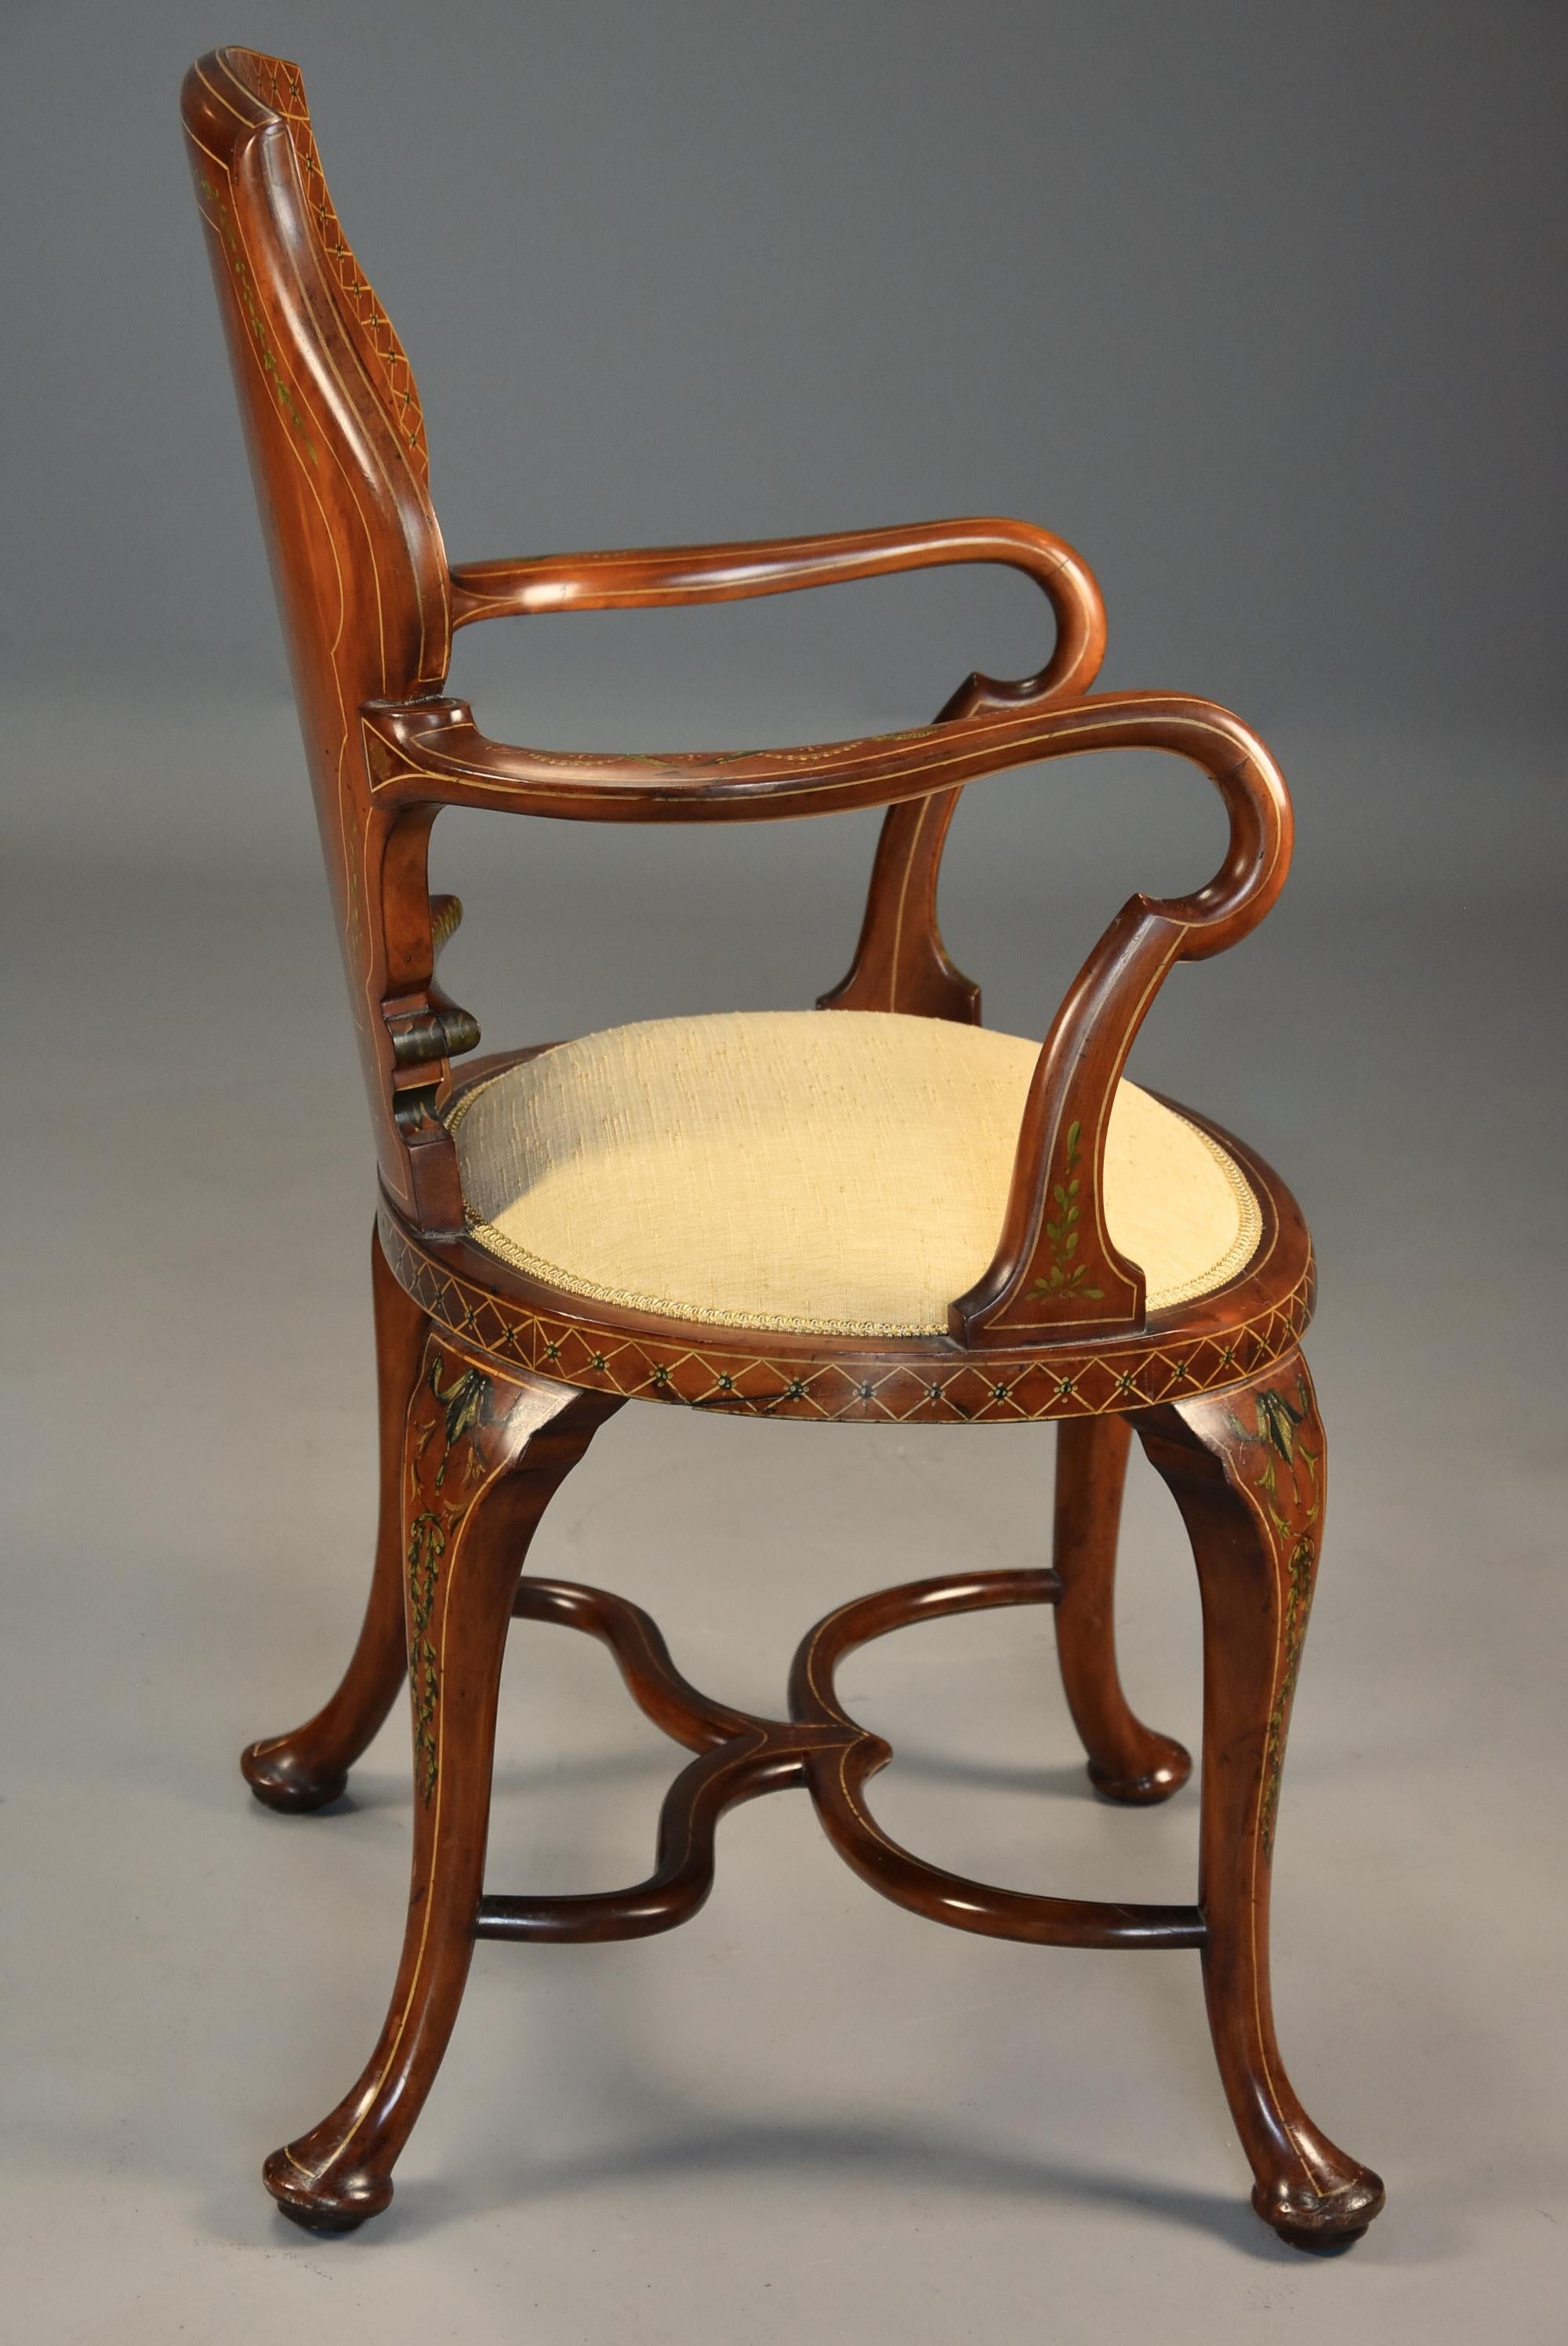 Highly Decorative Edwardian Satinwood and Painted Armchair in the Georgian Style For Sale 4